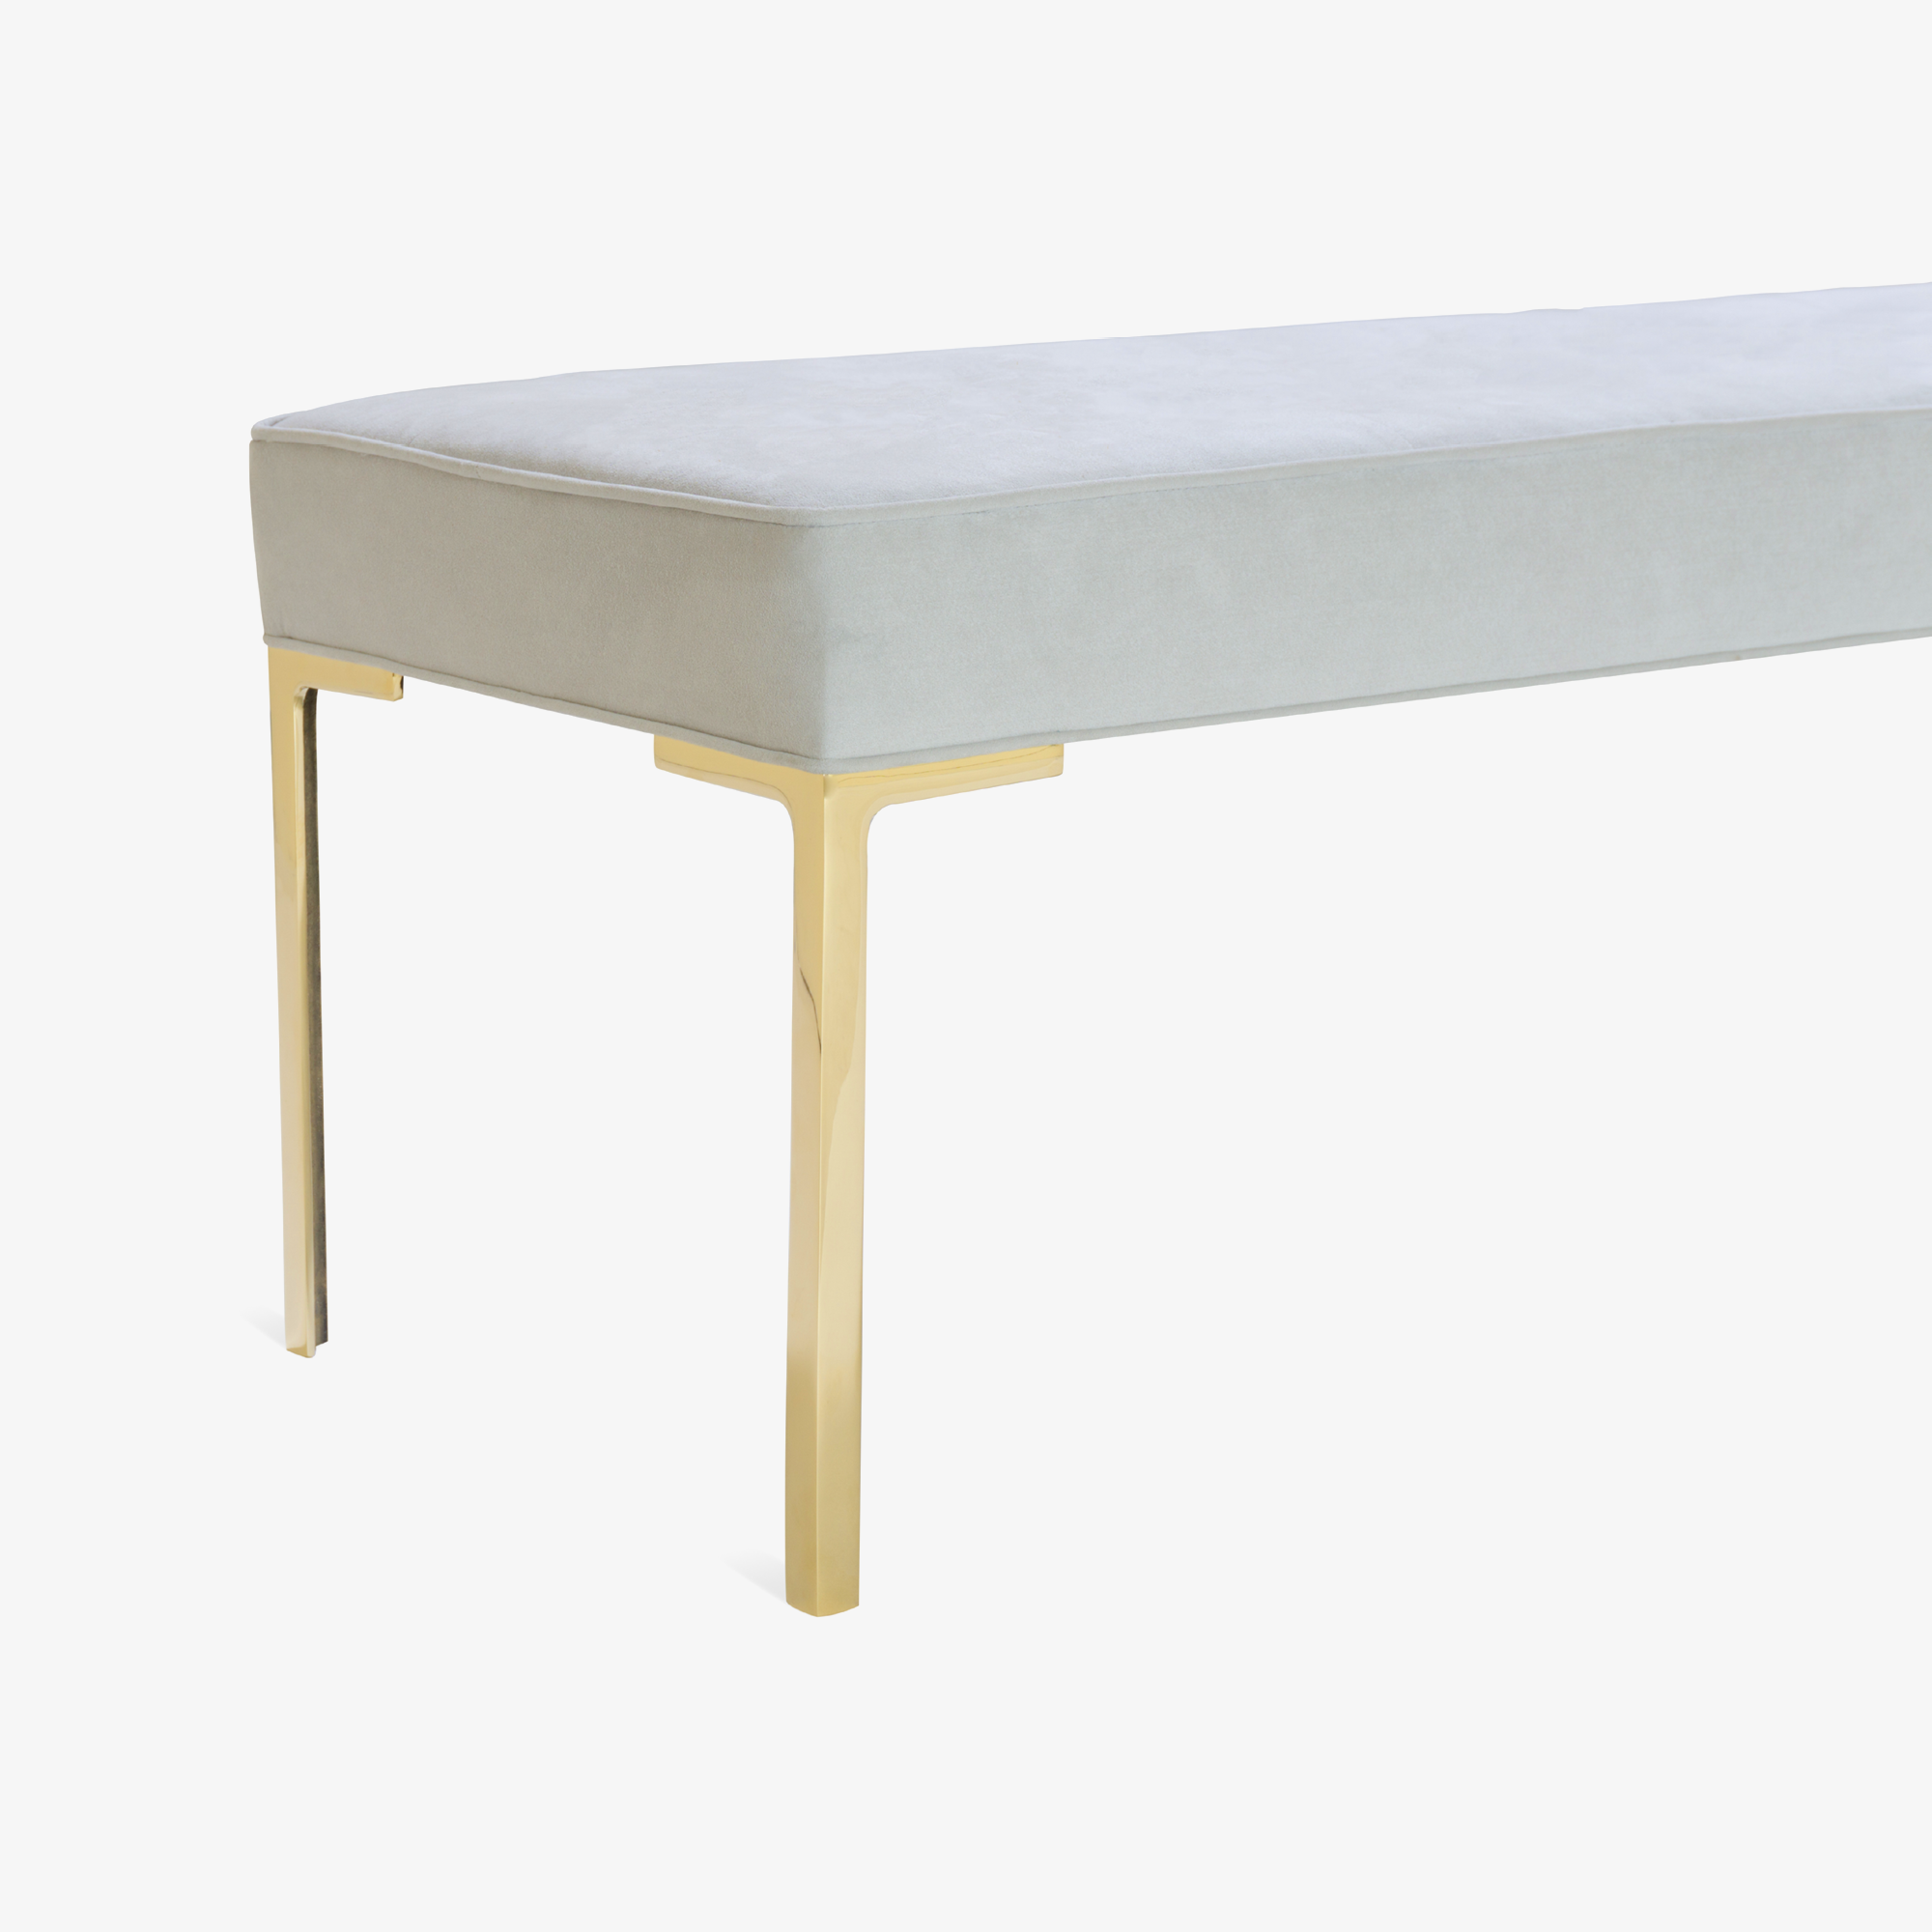 Astor 60%22 Brass Bench in Dove Luxe Suede4.png